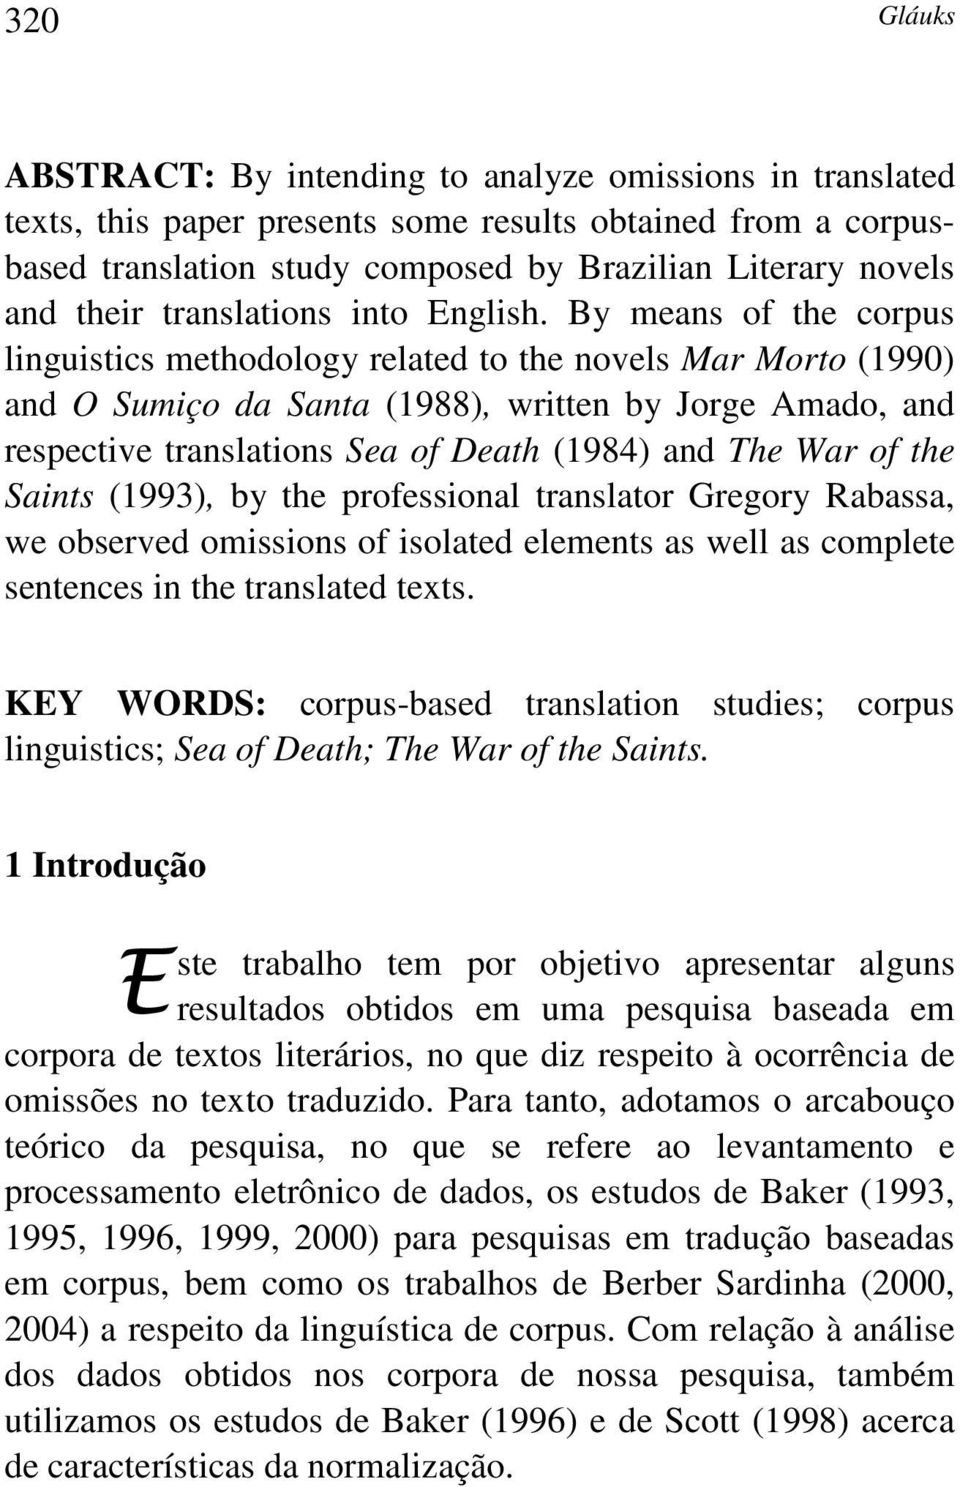 By means of the corpus linguistics methodology related to the novels Mar Morto (1990) and O Sumiço da Santa (1988), written by Jorge Amado, and respective translations Sea of Death (1984) and The War